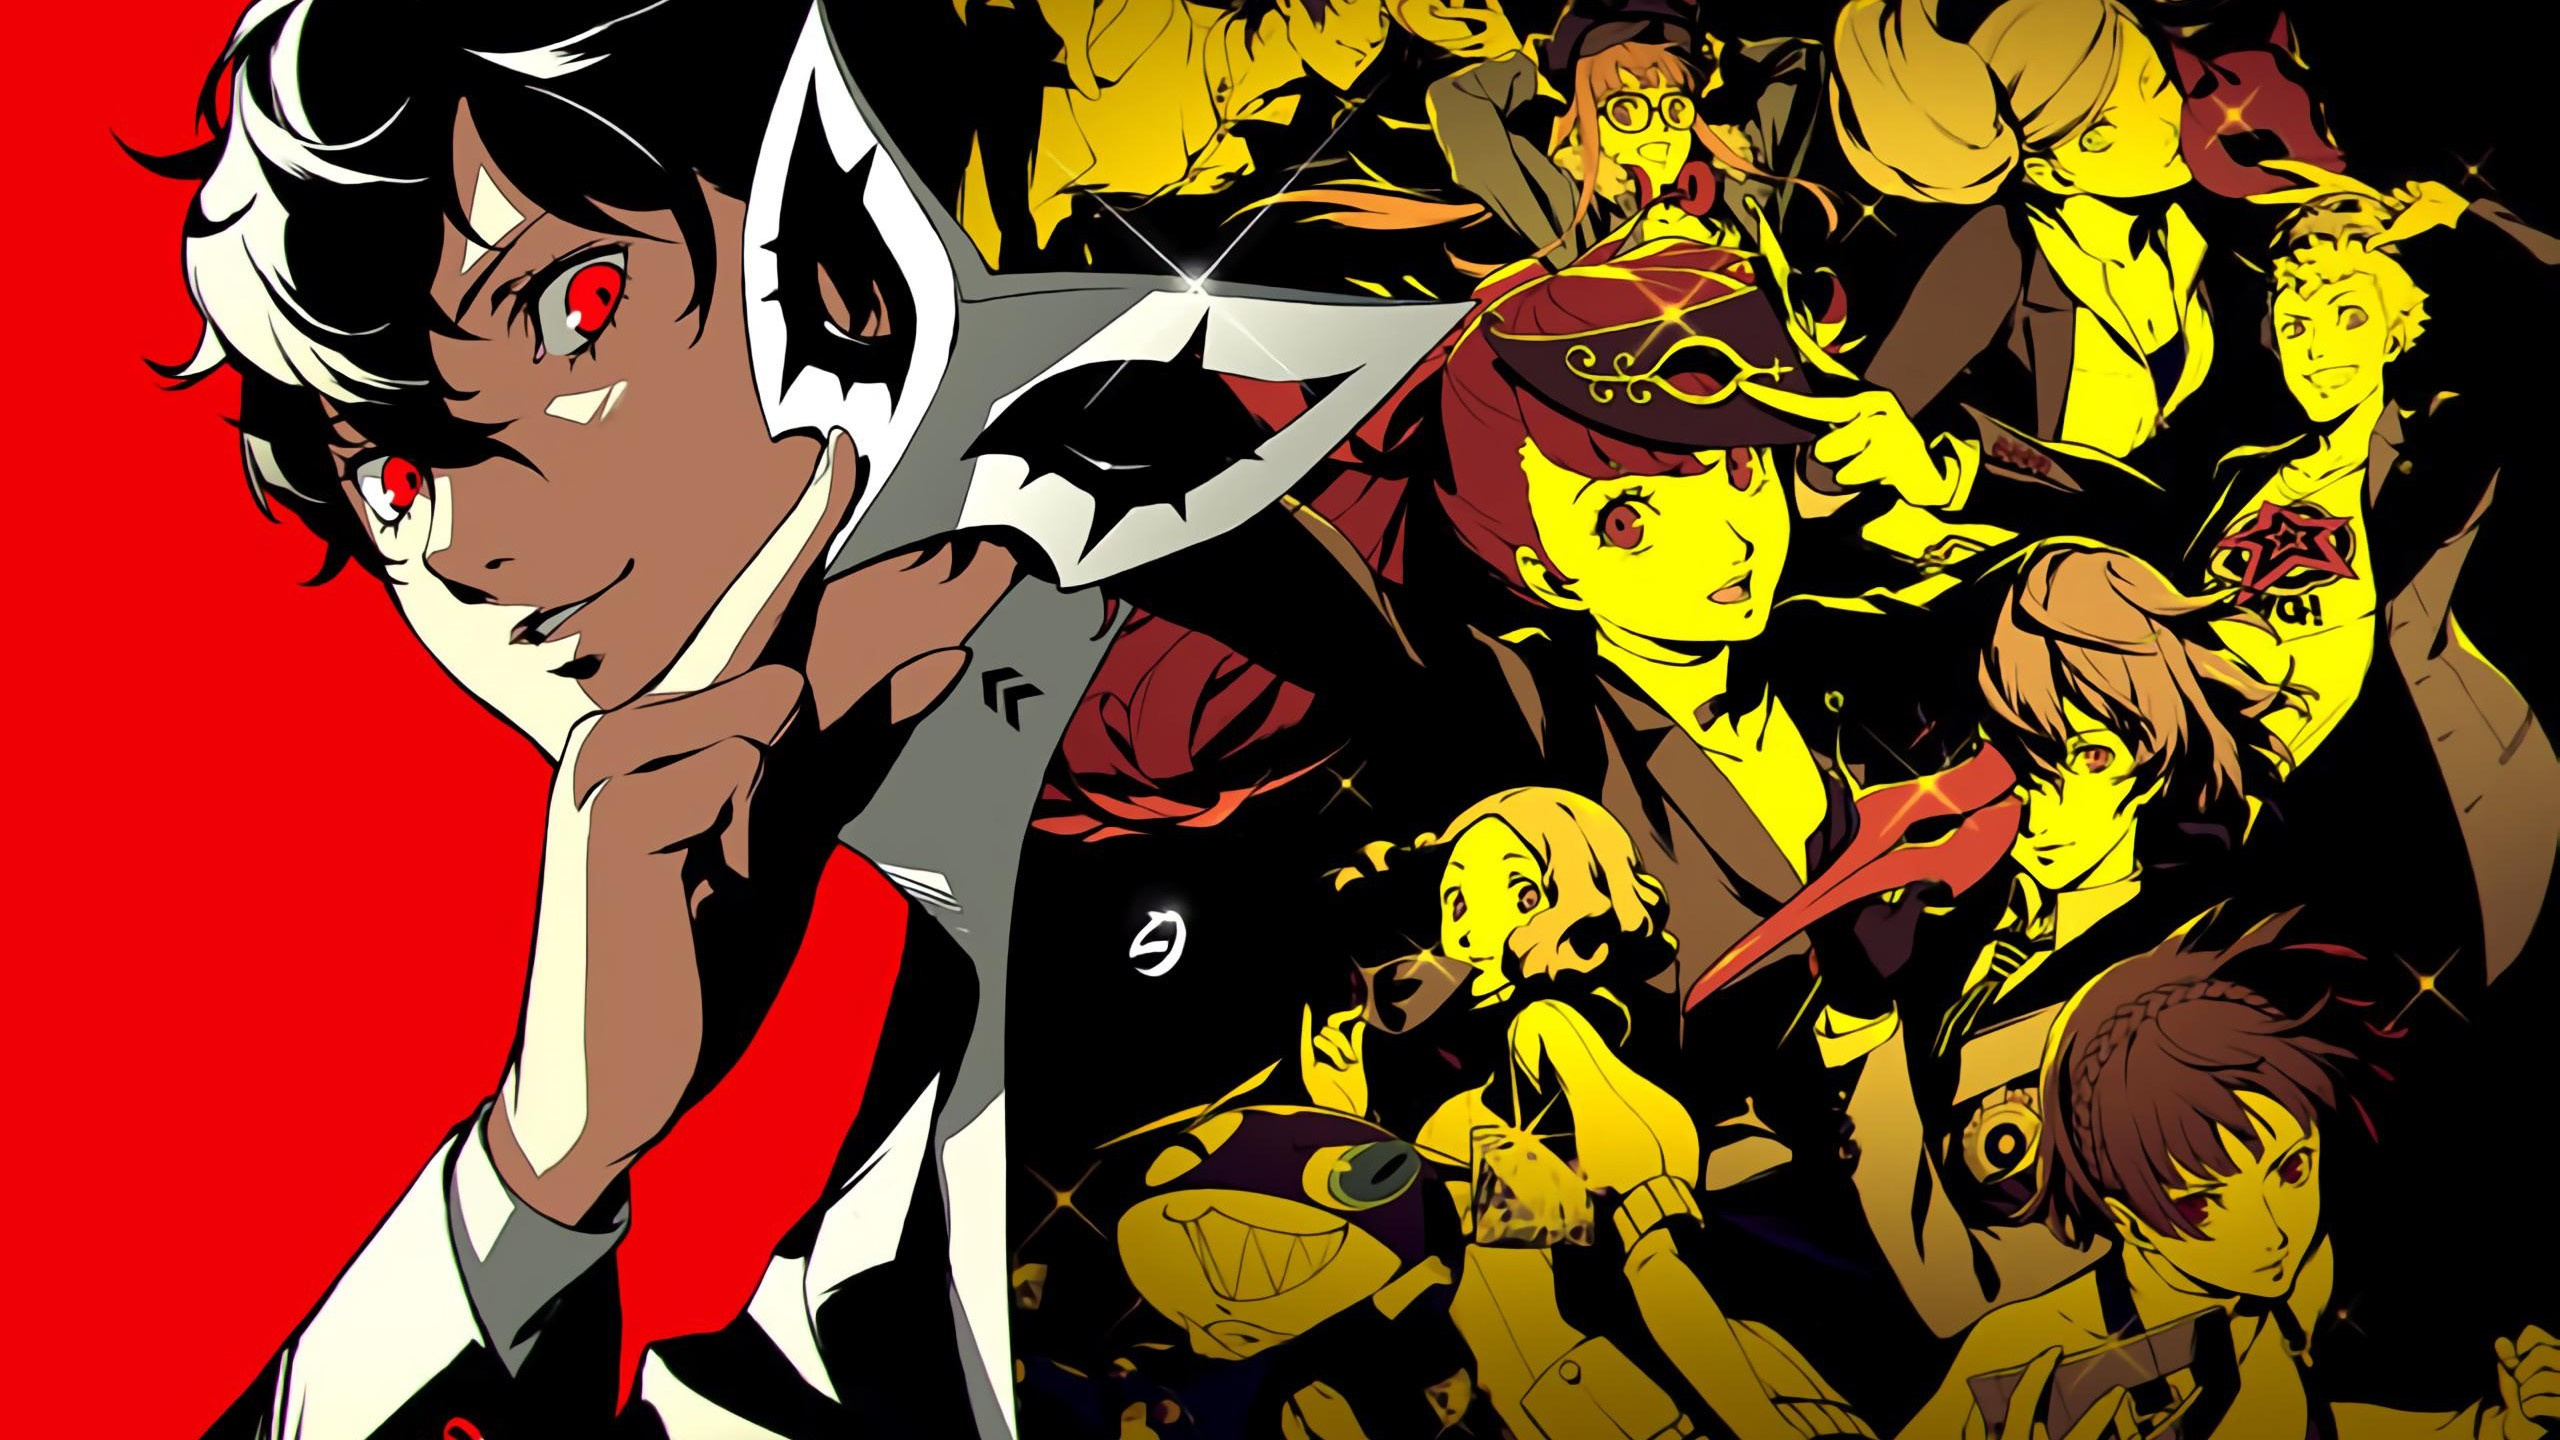 Persona 5 Strikers Goes All-Out In Latest Action-Packed Trailer